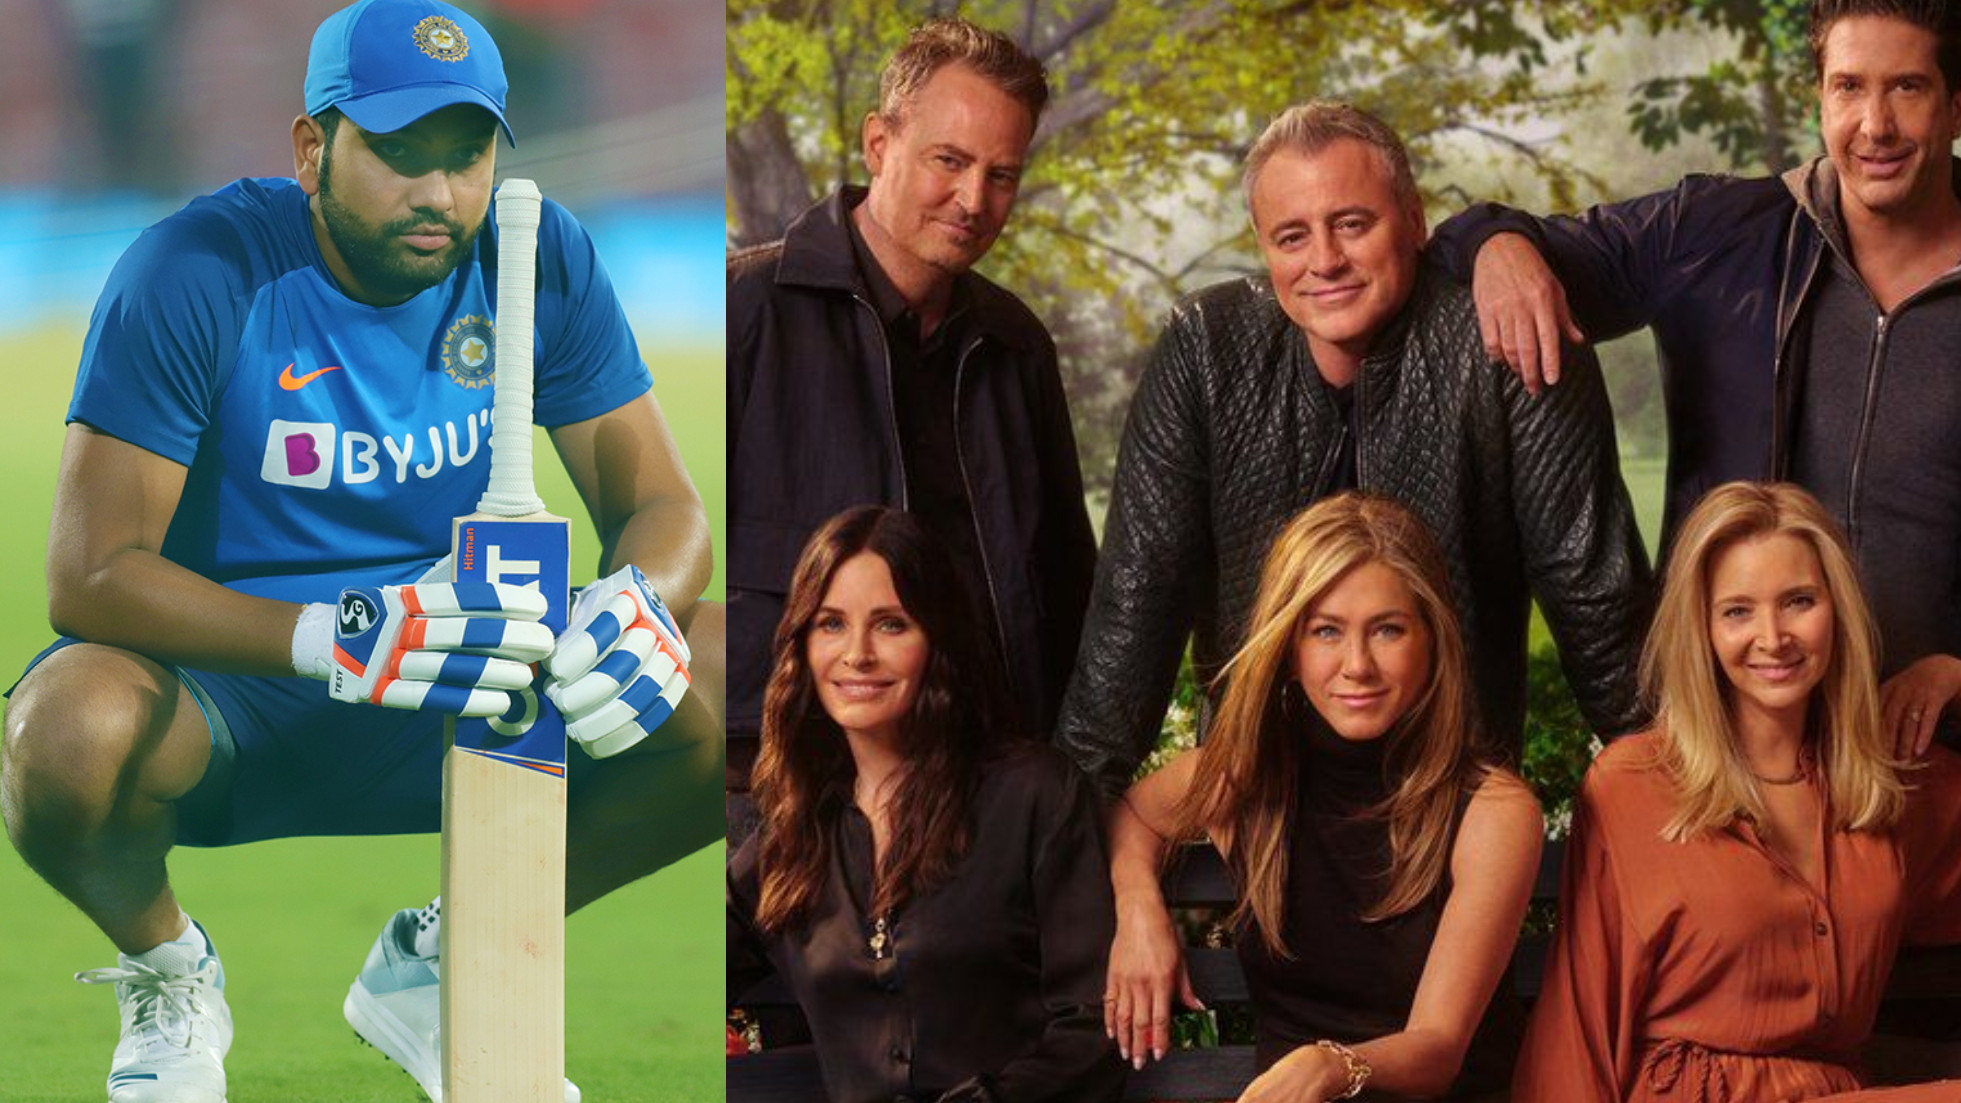 Rohit Sharma yearns for this kind of FRIENDS reunion